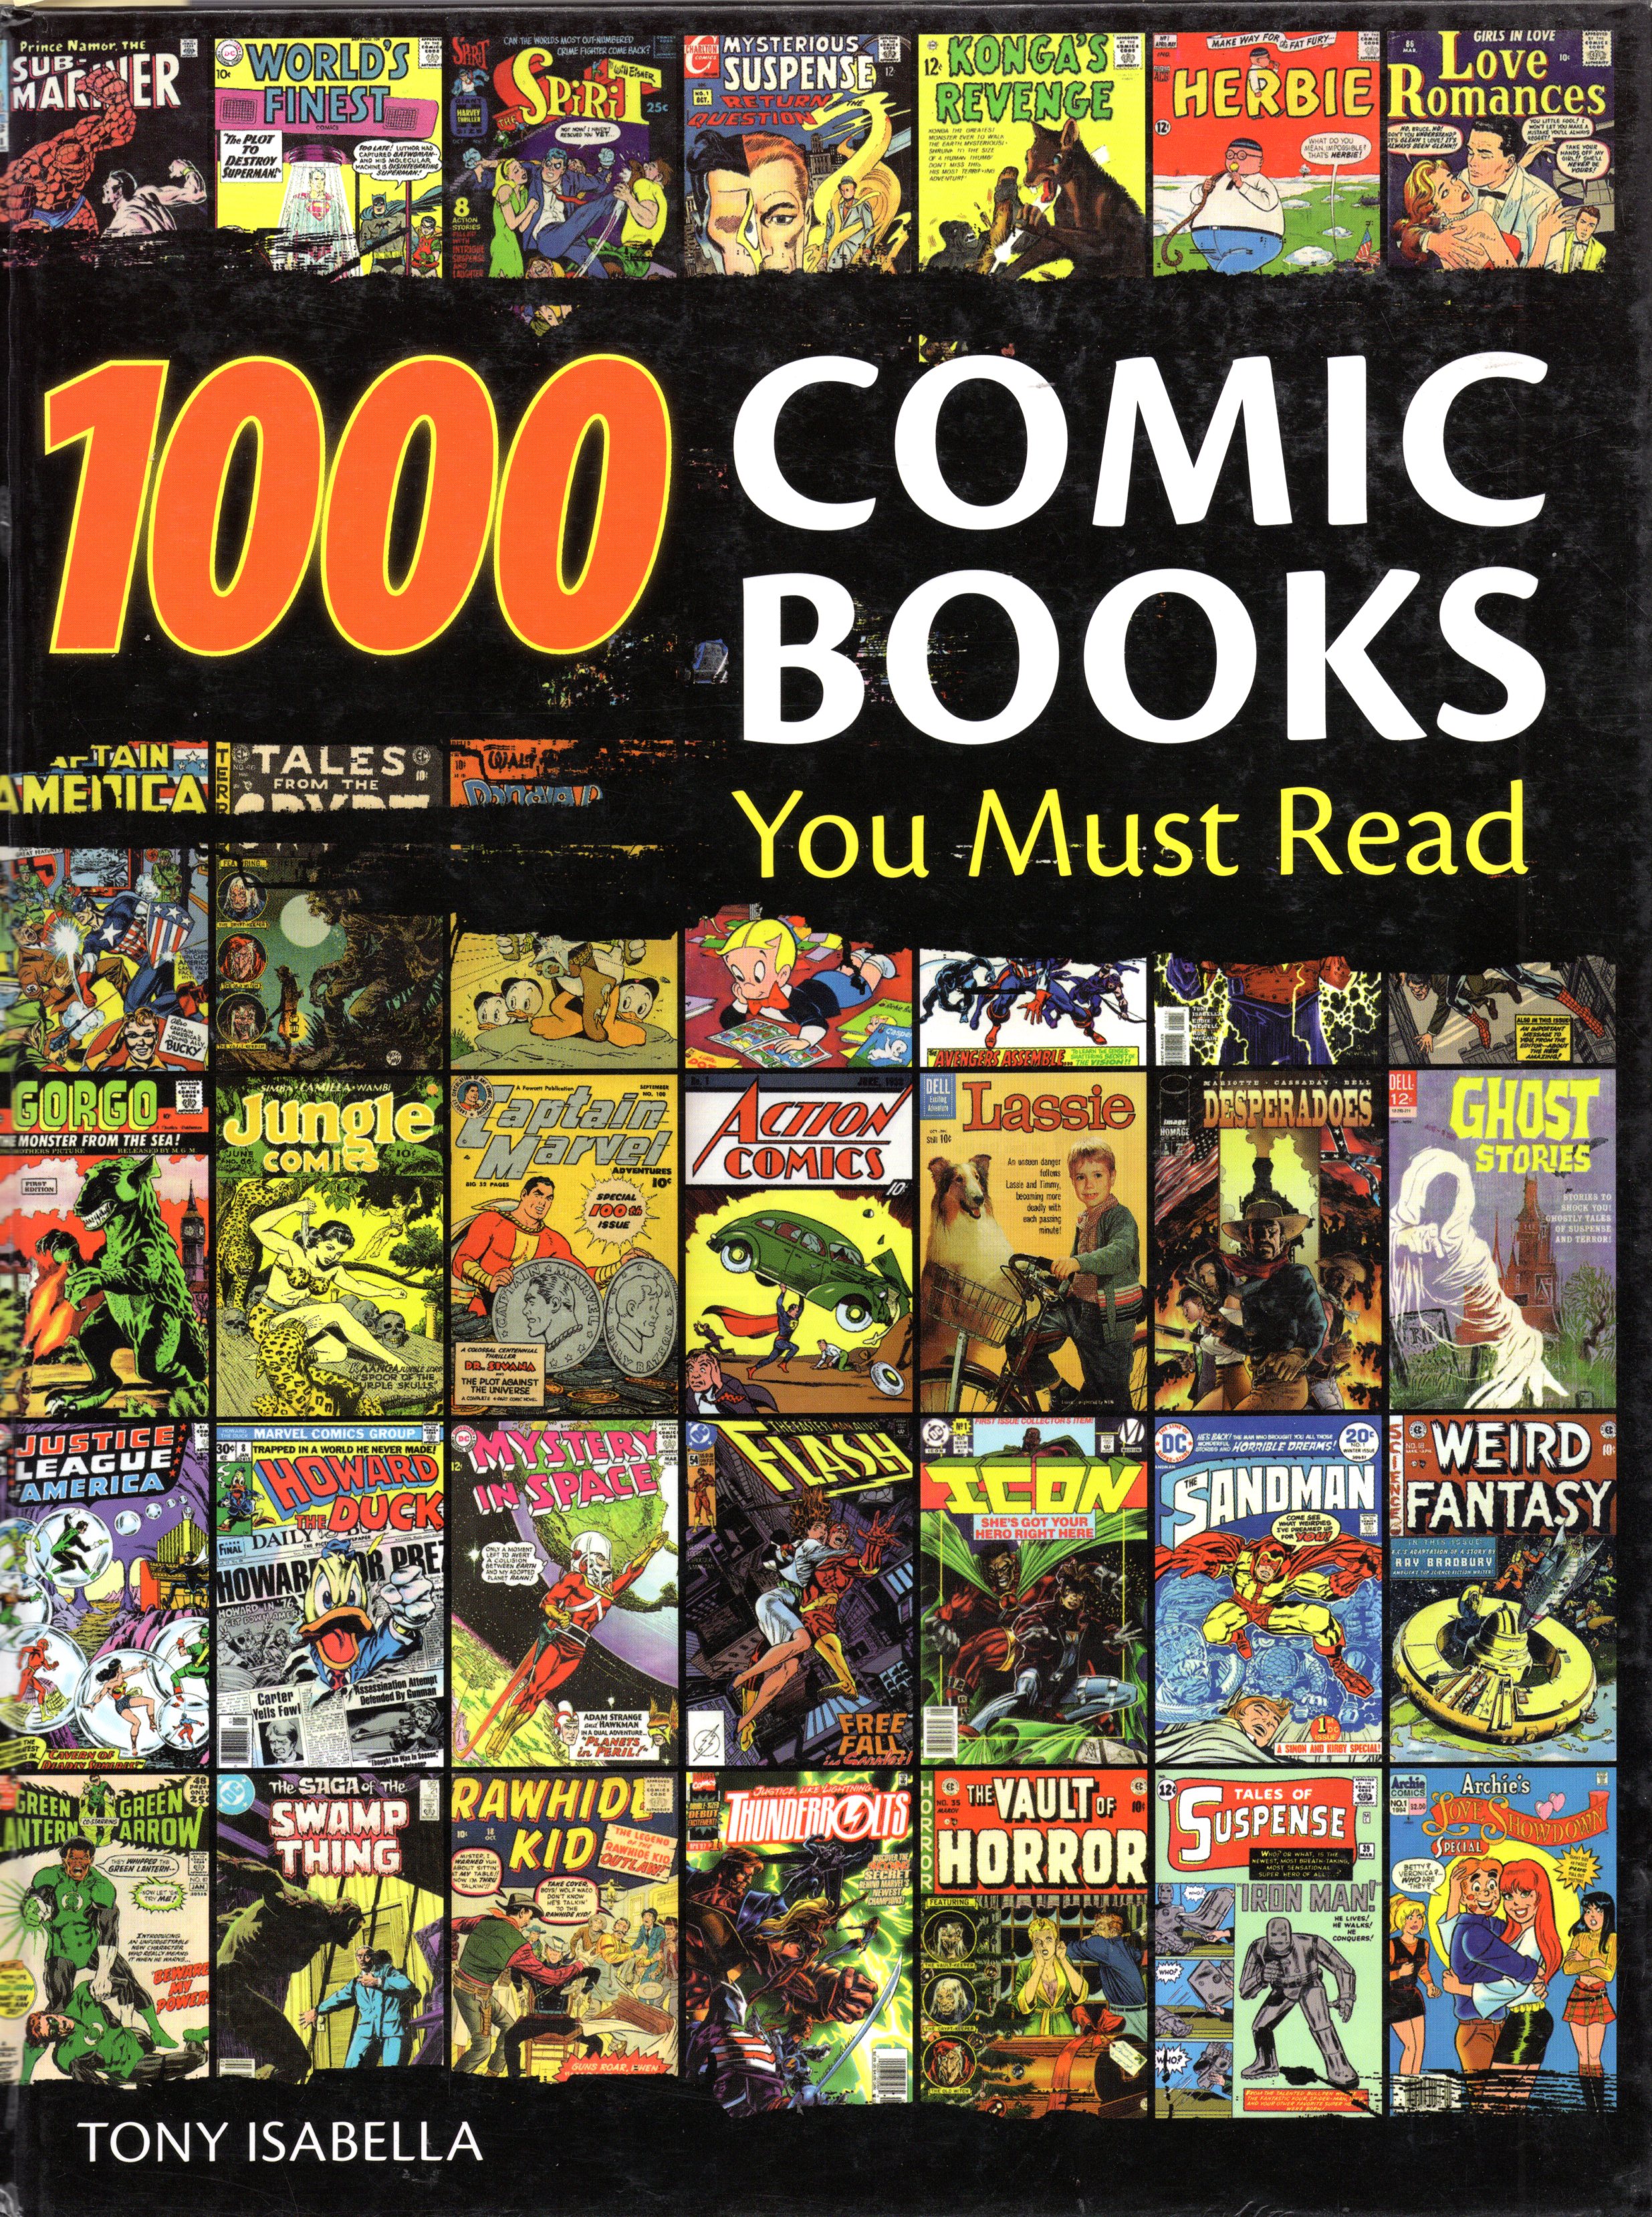 A - 1000 Comic Books You Must Read